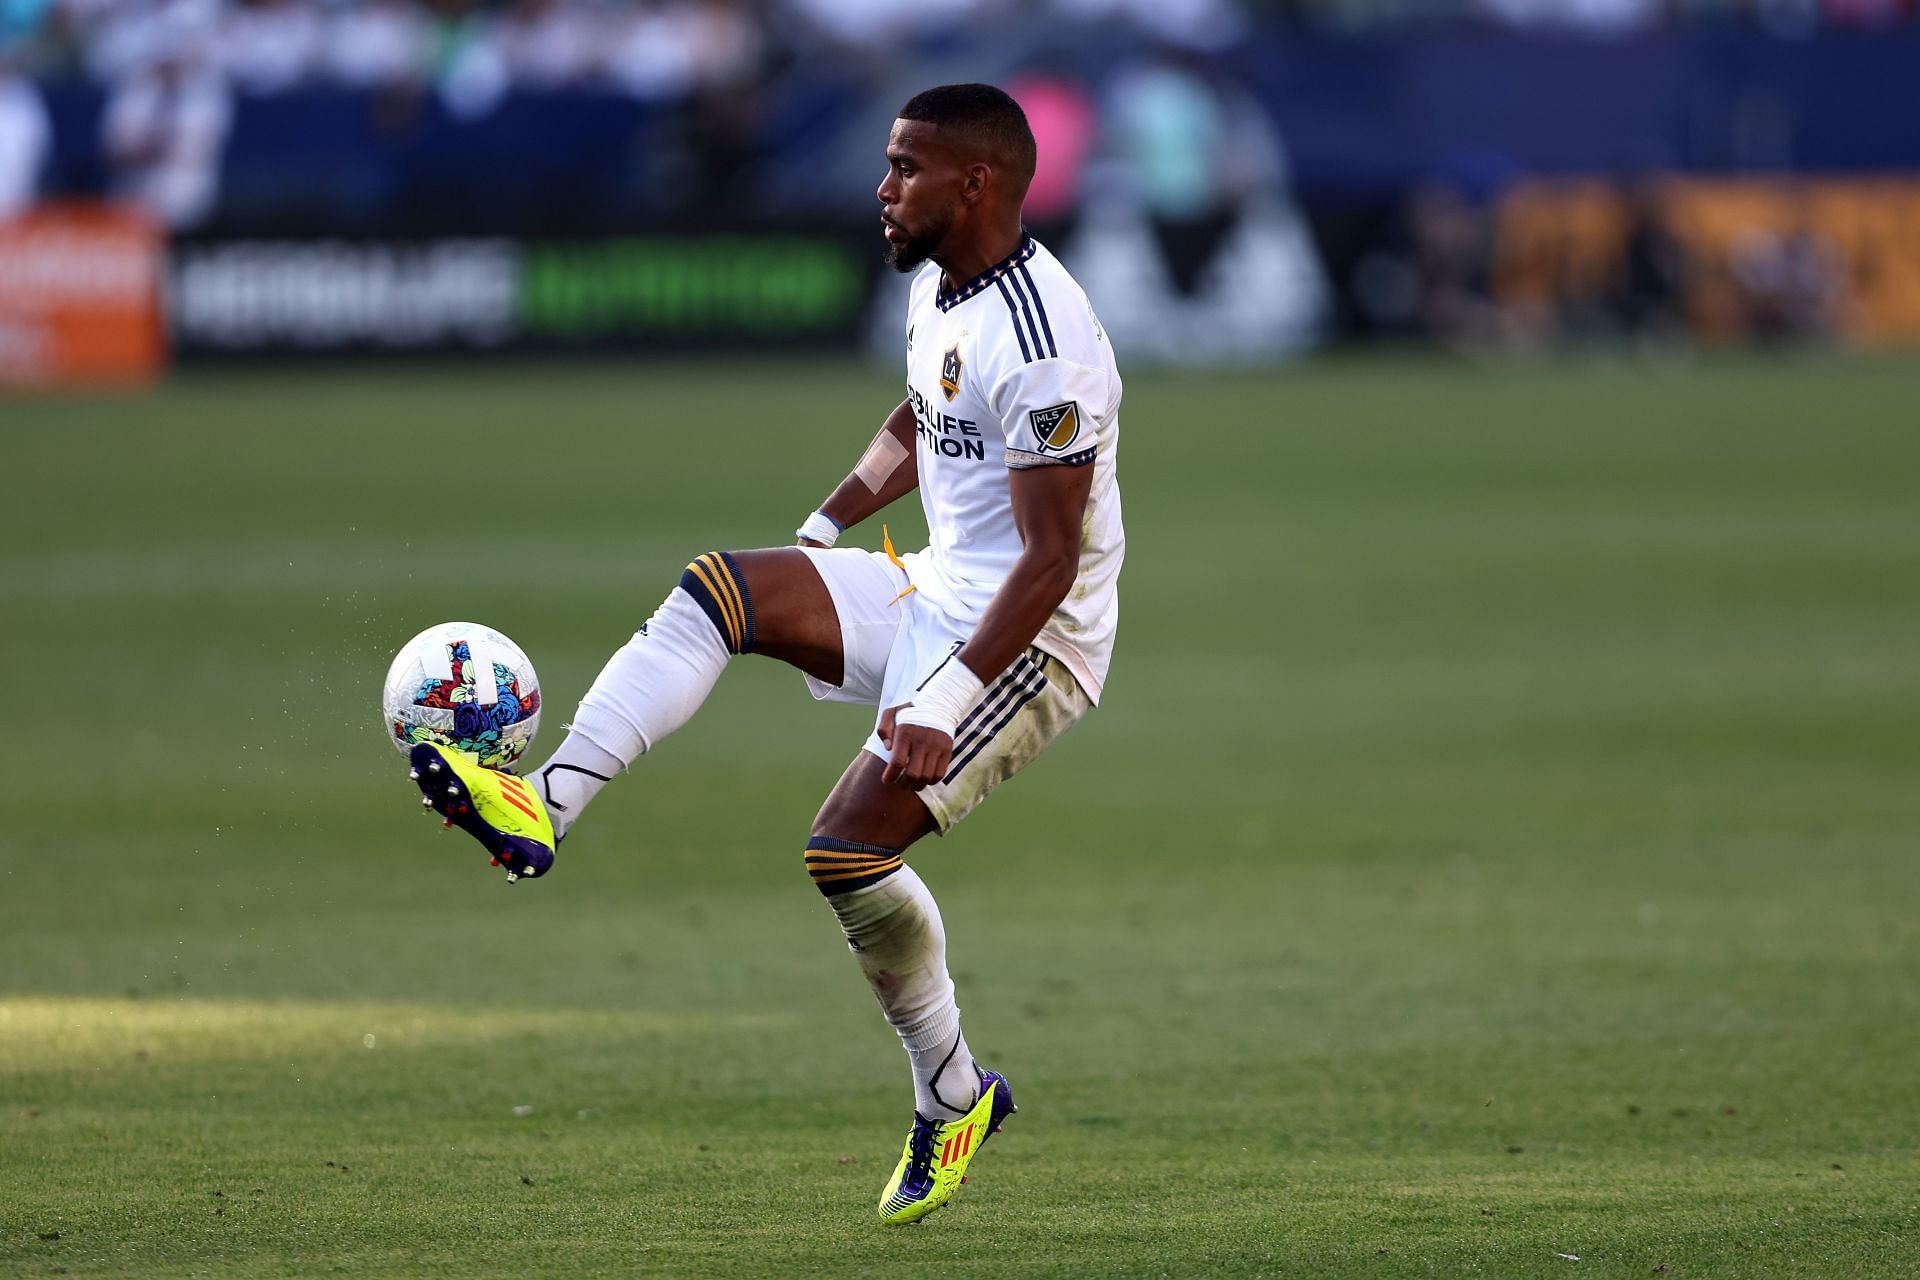 Los Angeles Galaxy face Sacramento Republic in their US Open Cup fixture on Tuesday